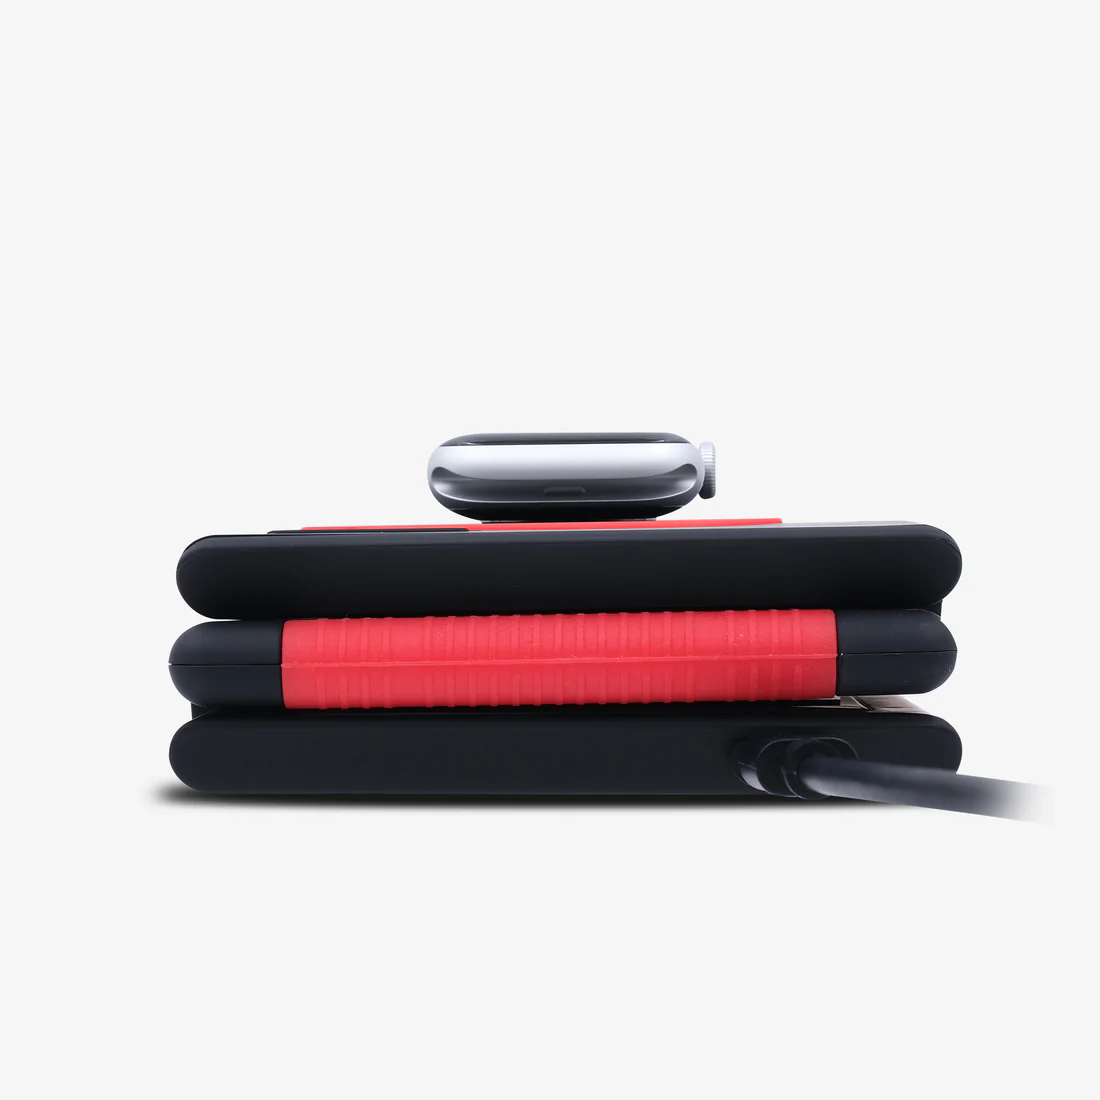 Unravel 3-in-1 Foldable Travel Wireless Charger, Apple Watch Charging Edition, Fire-Emoji Red